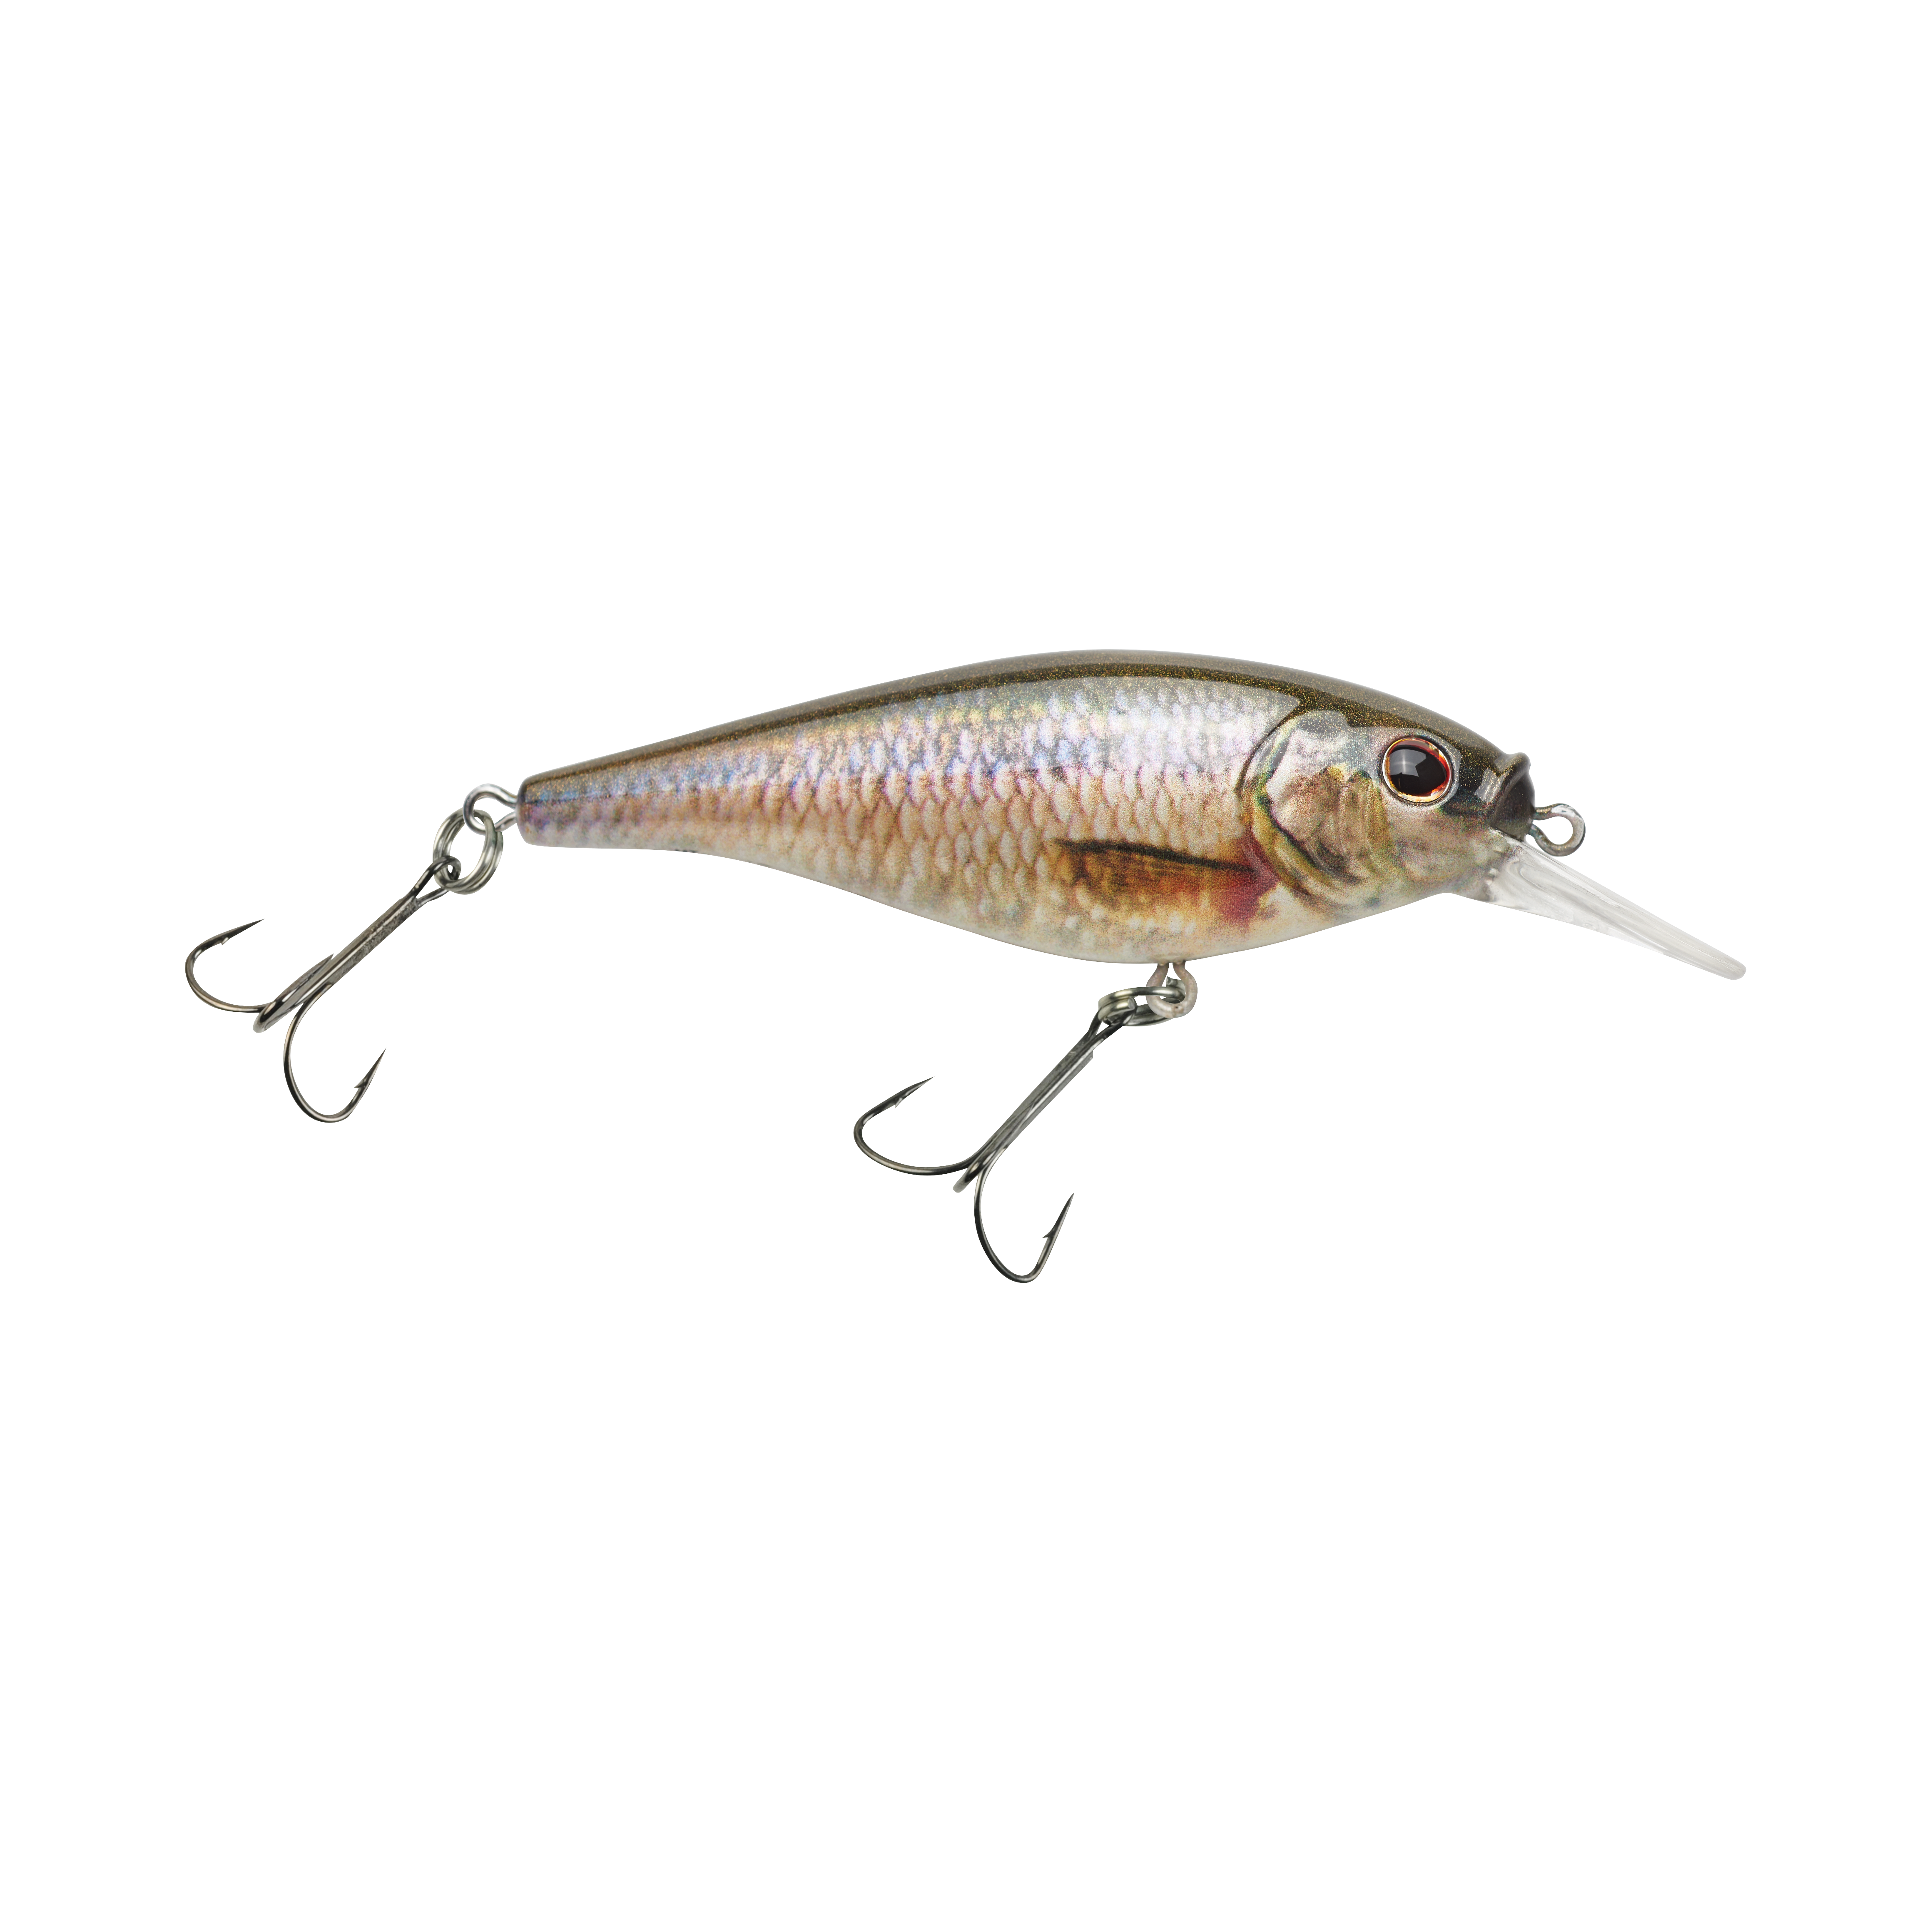 Berkley Flicker Shad Shallow Fishing Lure, HD Threadfin Shad, 1/6 oz, 2in |  5cm Crankbaits, Size, Profile and Dive Depth Imitates Real Shad, Equipped